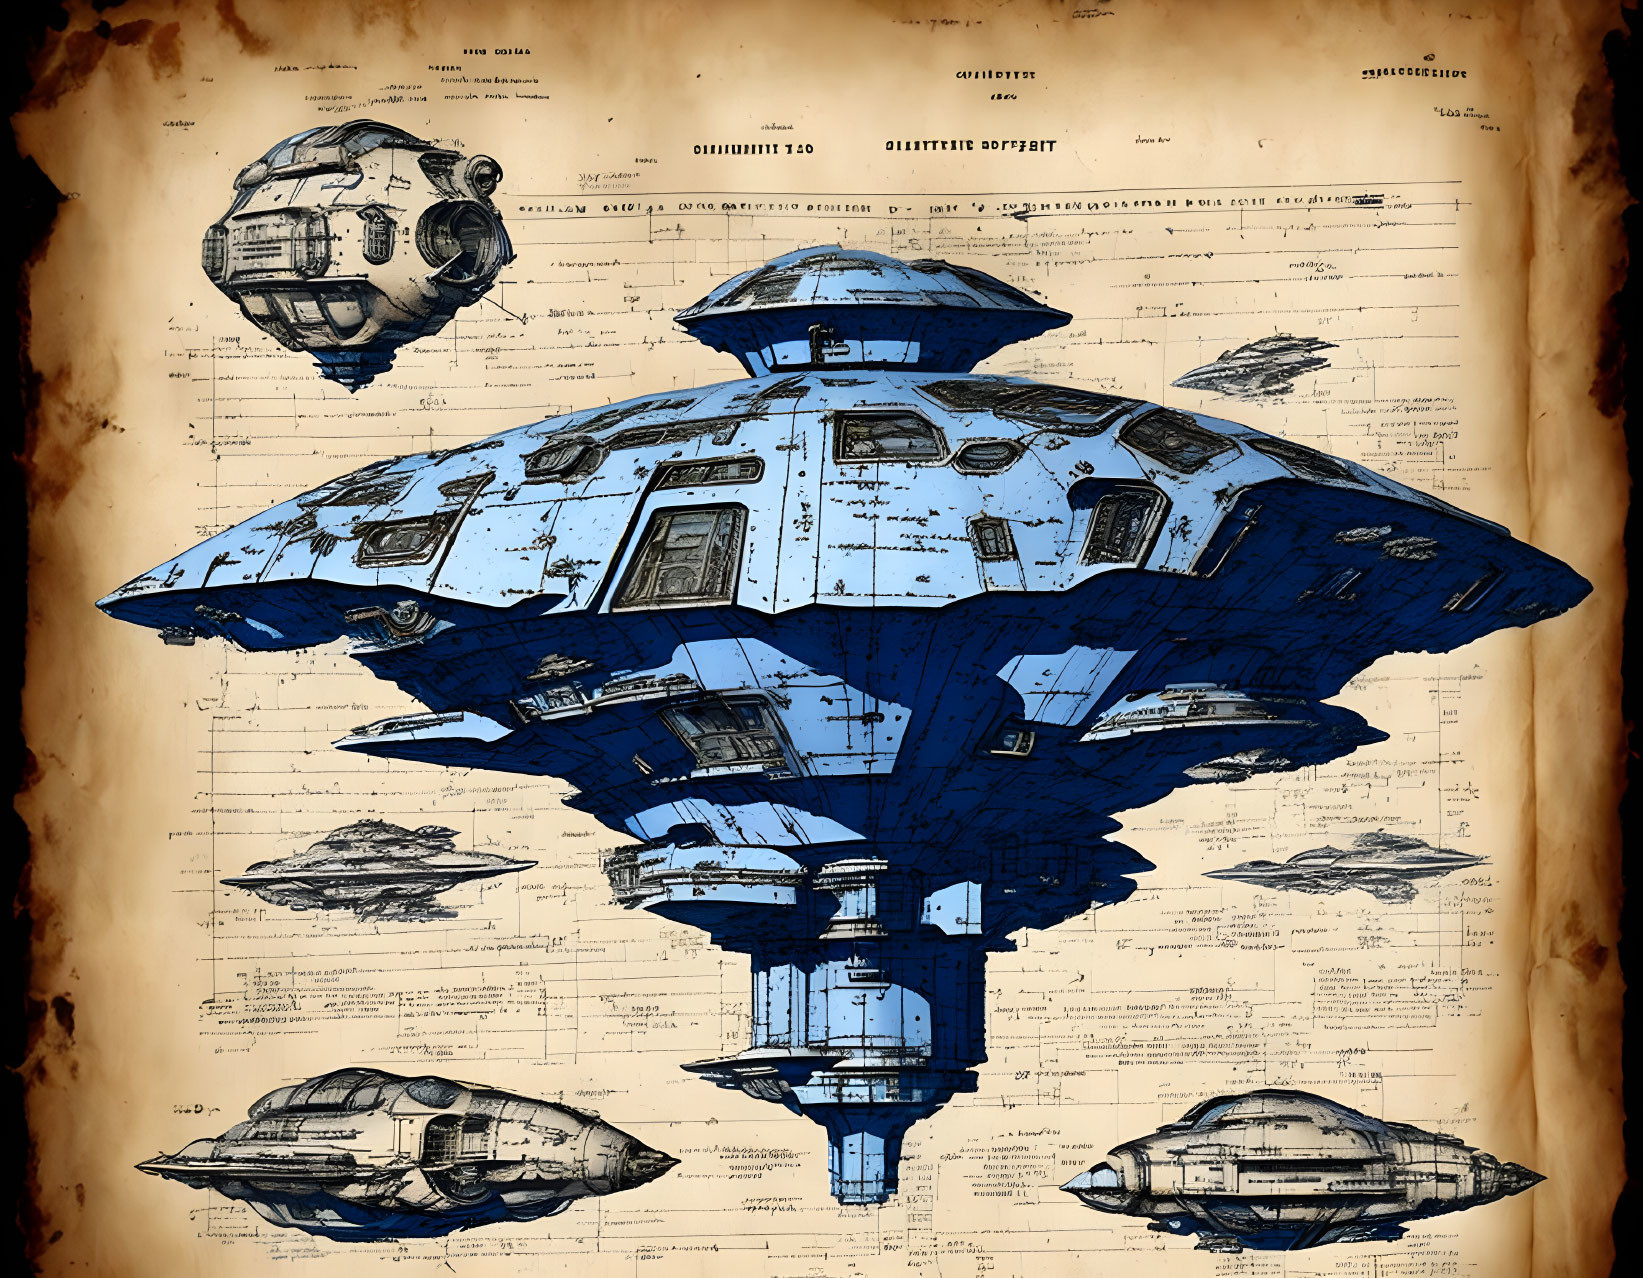 Vintage-style Blueprints of Futuristic Spacecraft on Aged Paper Background